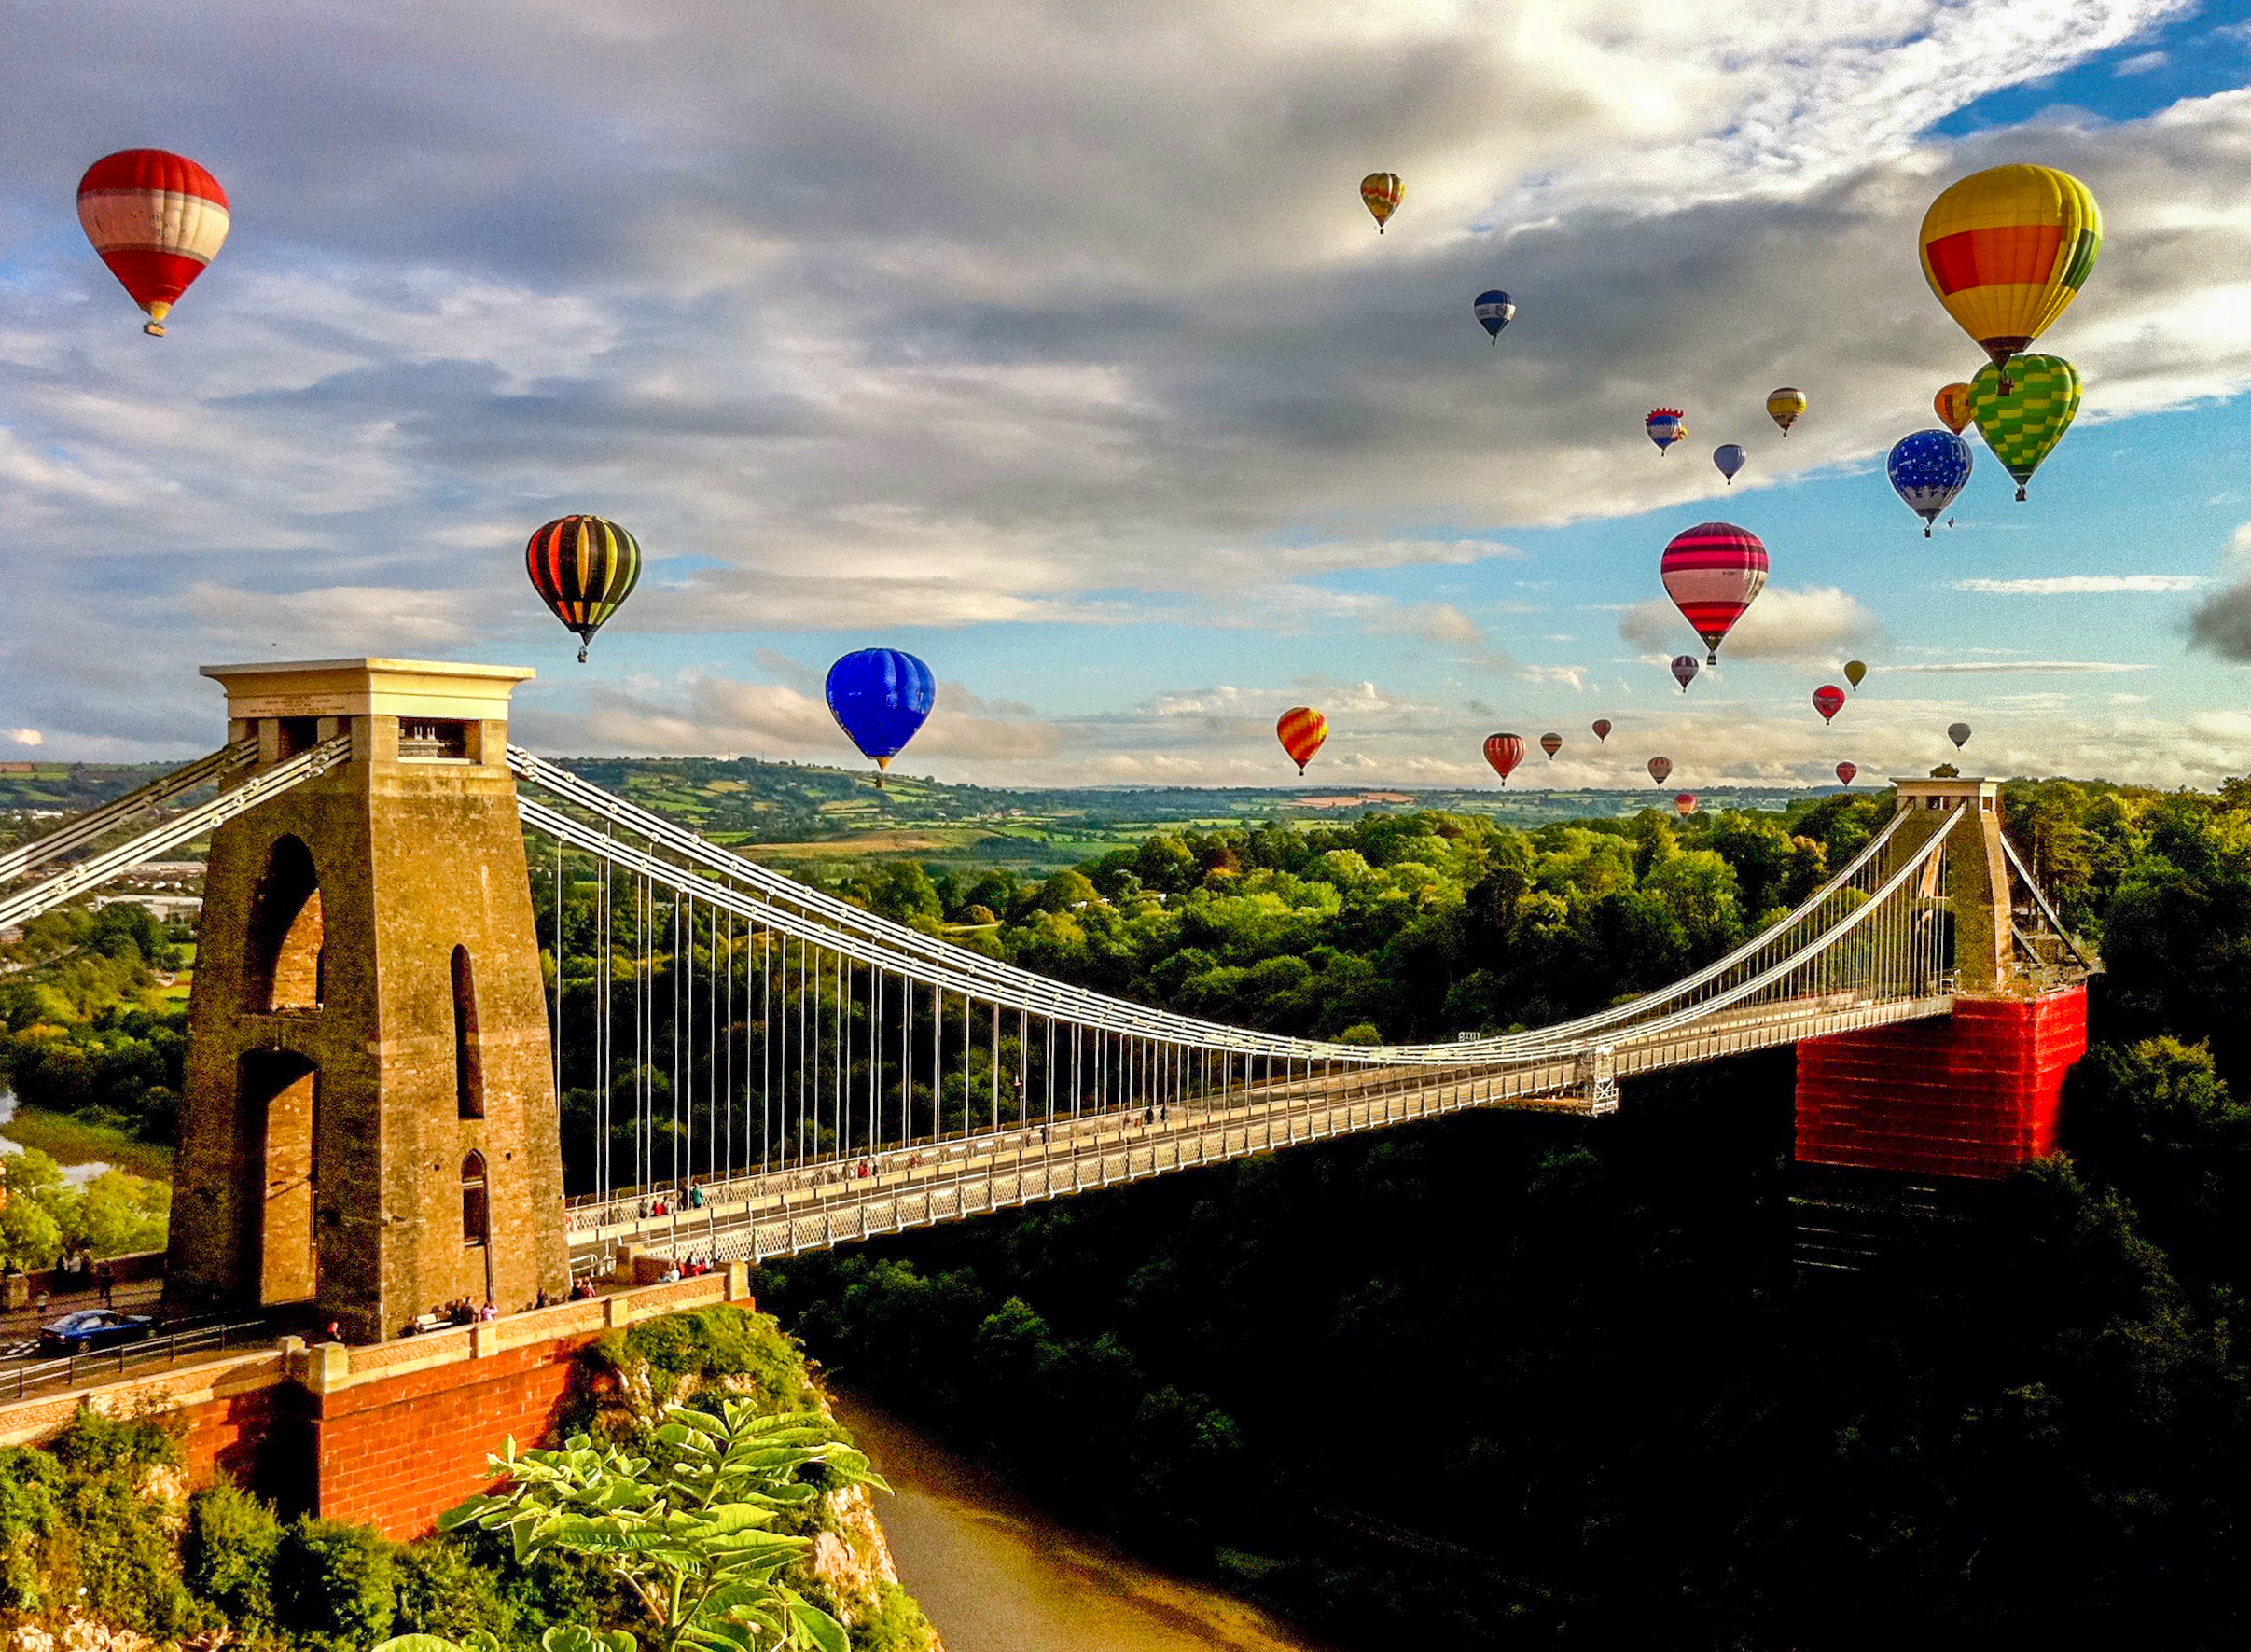 Hot air balloons over suspension bridge in the English countryside